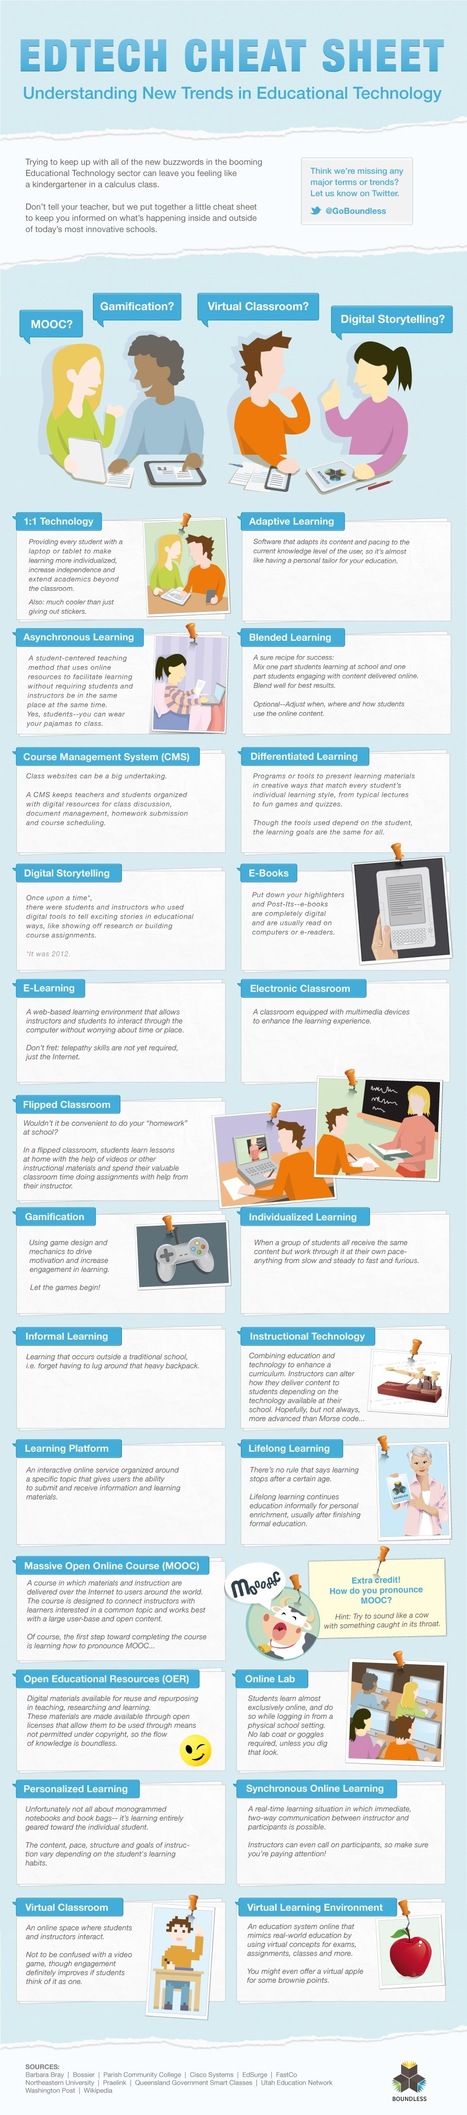 Educational Technology Buzzwords [infographic] | Moodle and Web 2.0 | Scoop.it